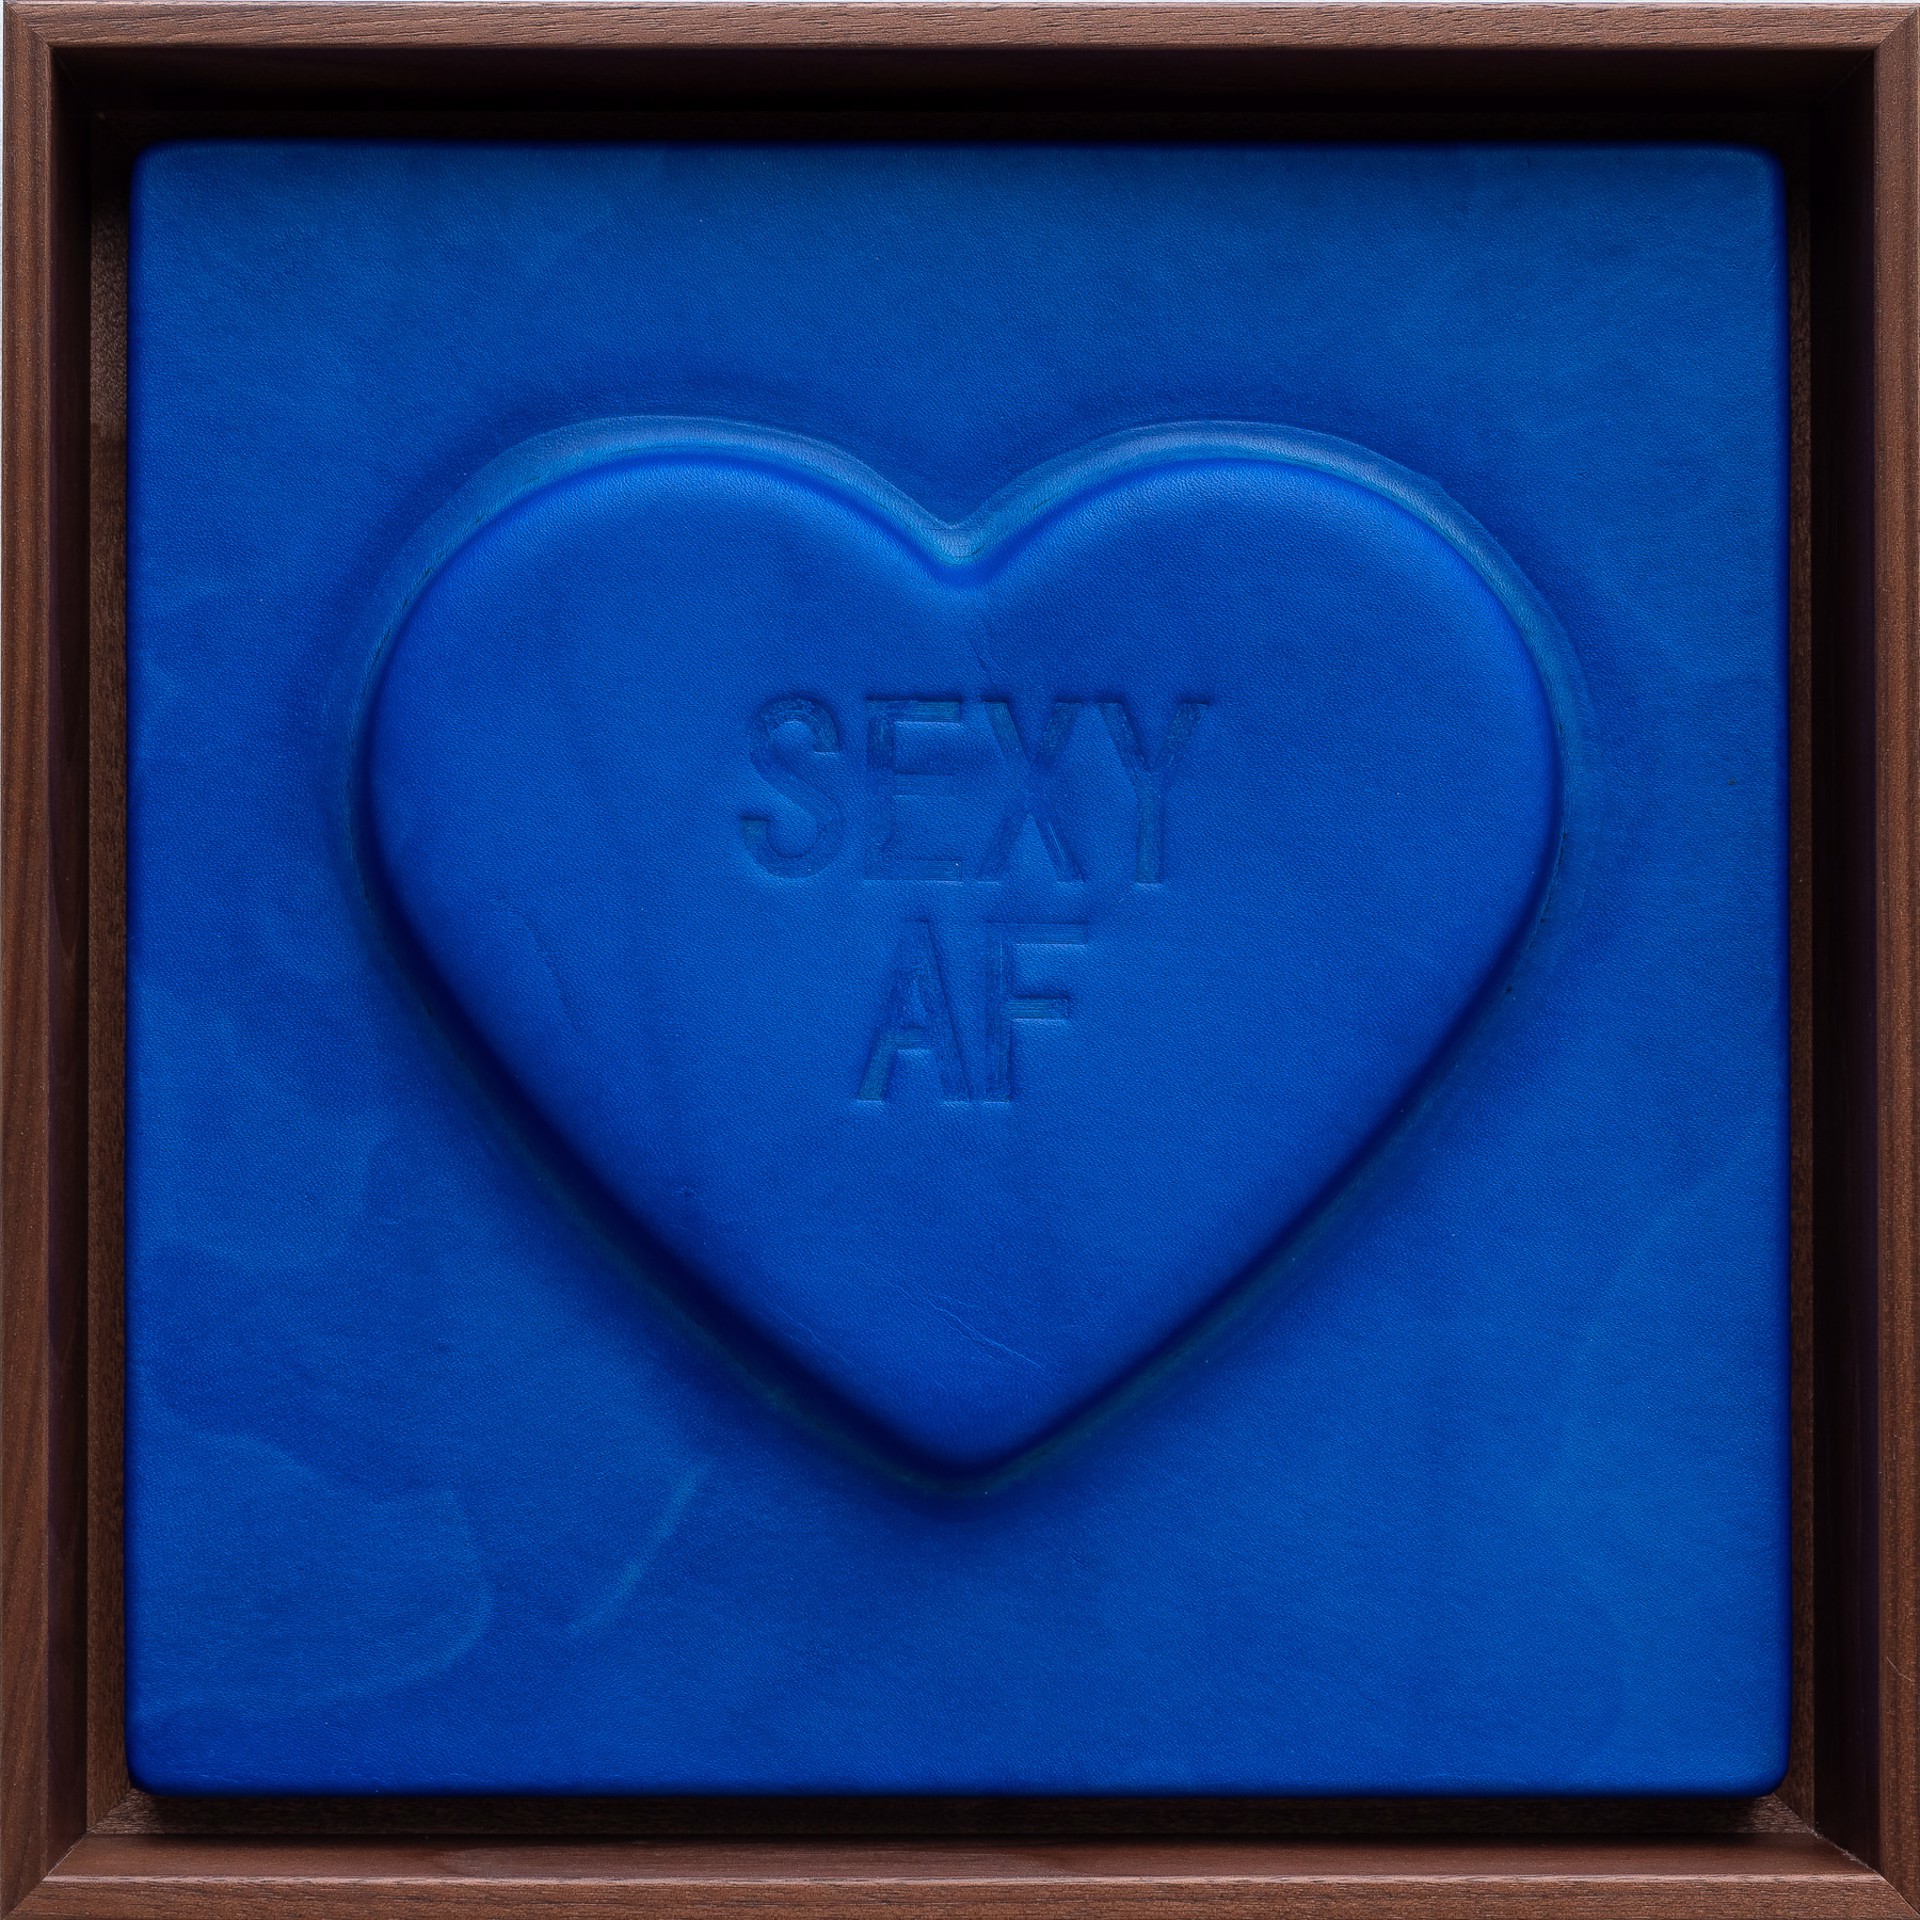 'SEXY AF' - Sweetheart series by Mx. Hyde